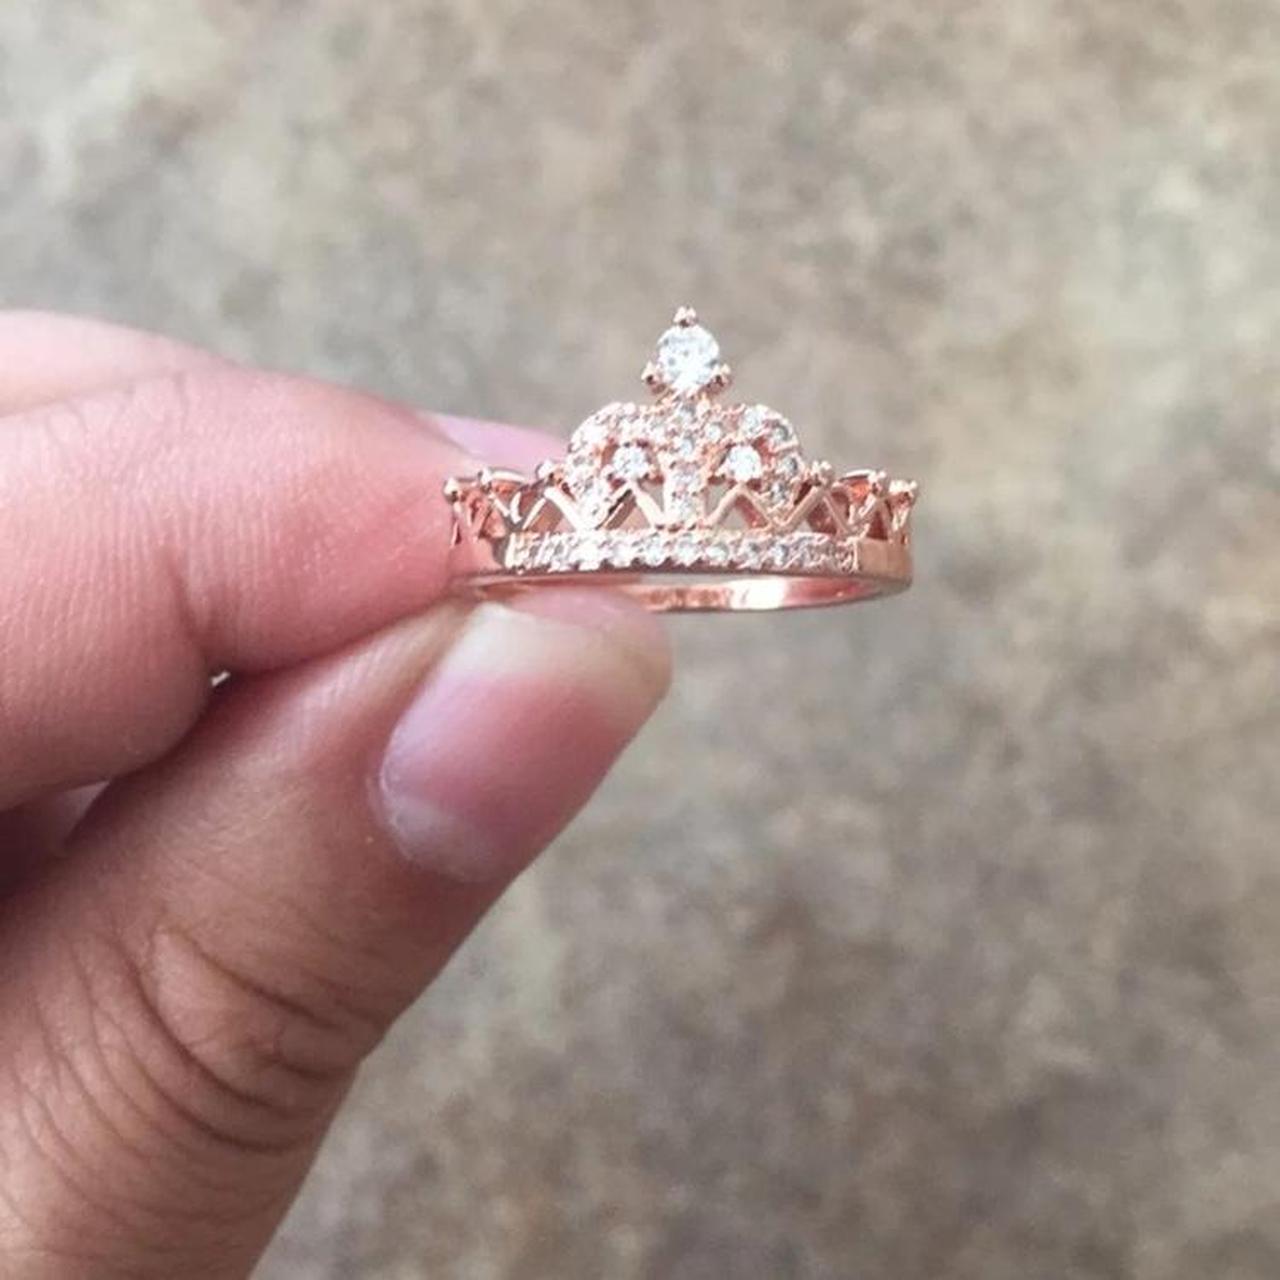 Product Image 1 - Rose gold princess crown ring
Condition: